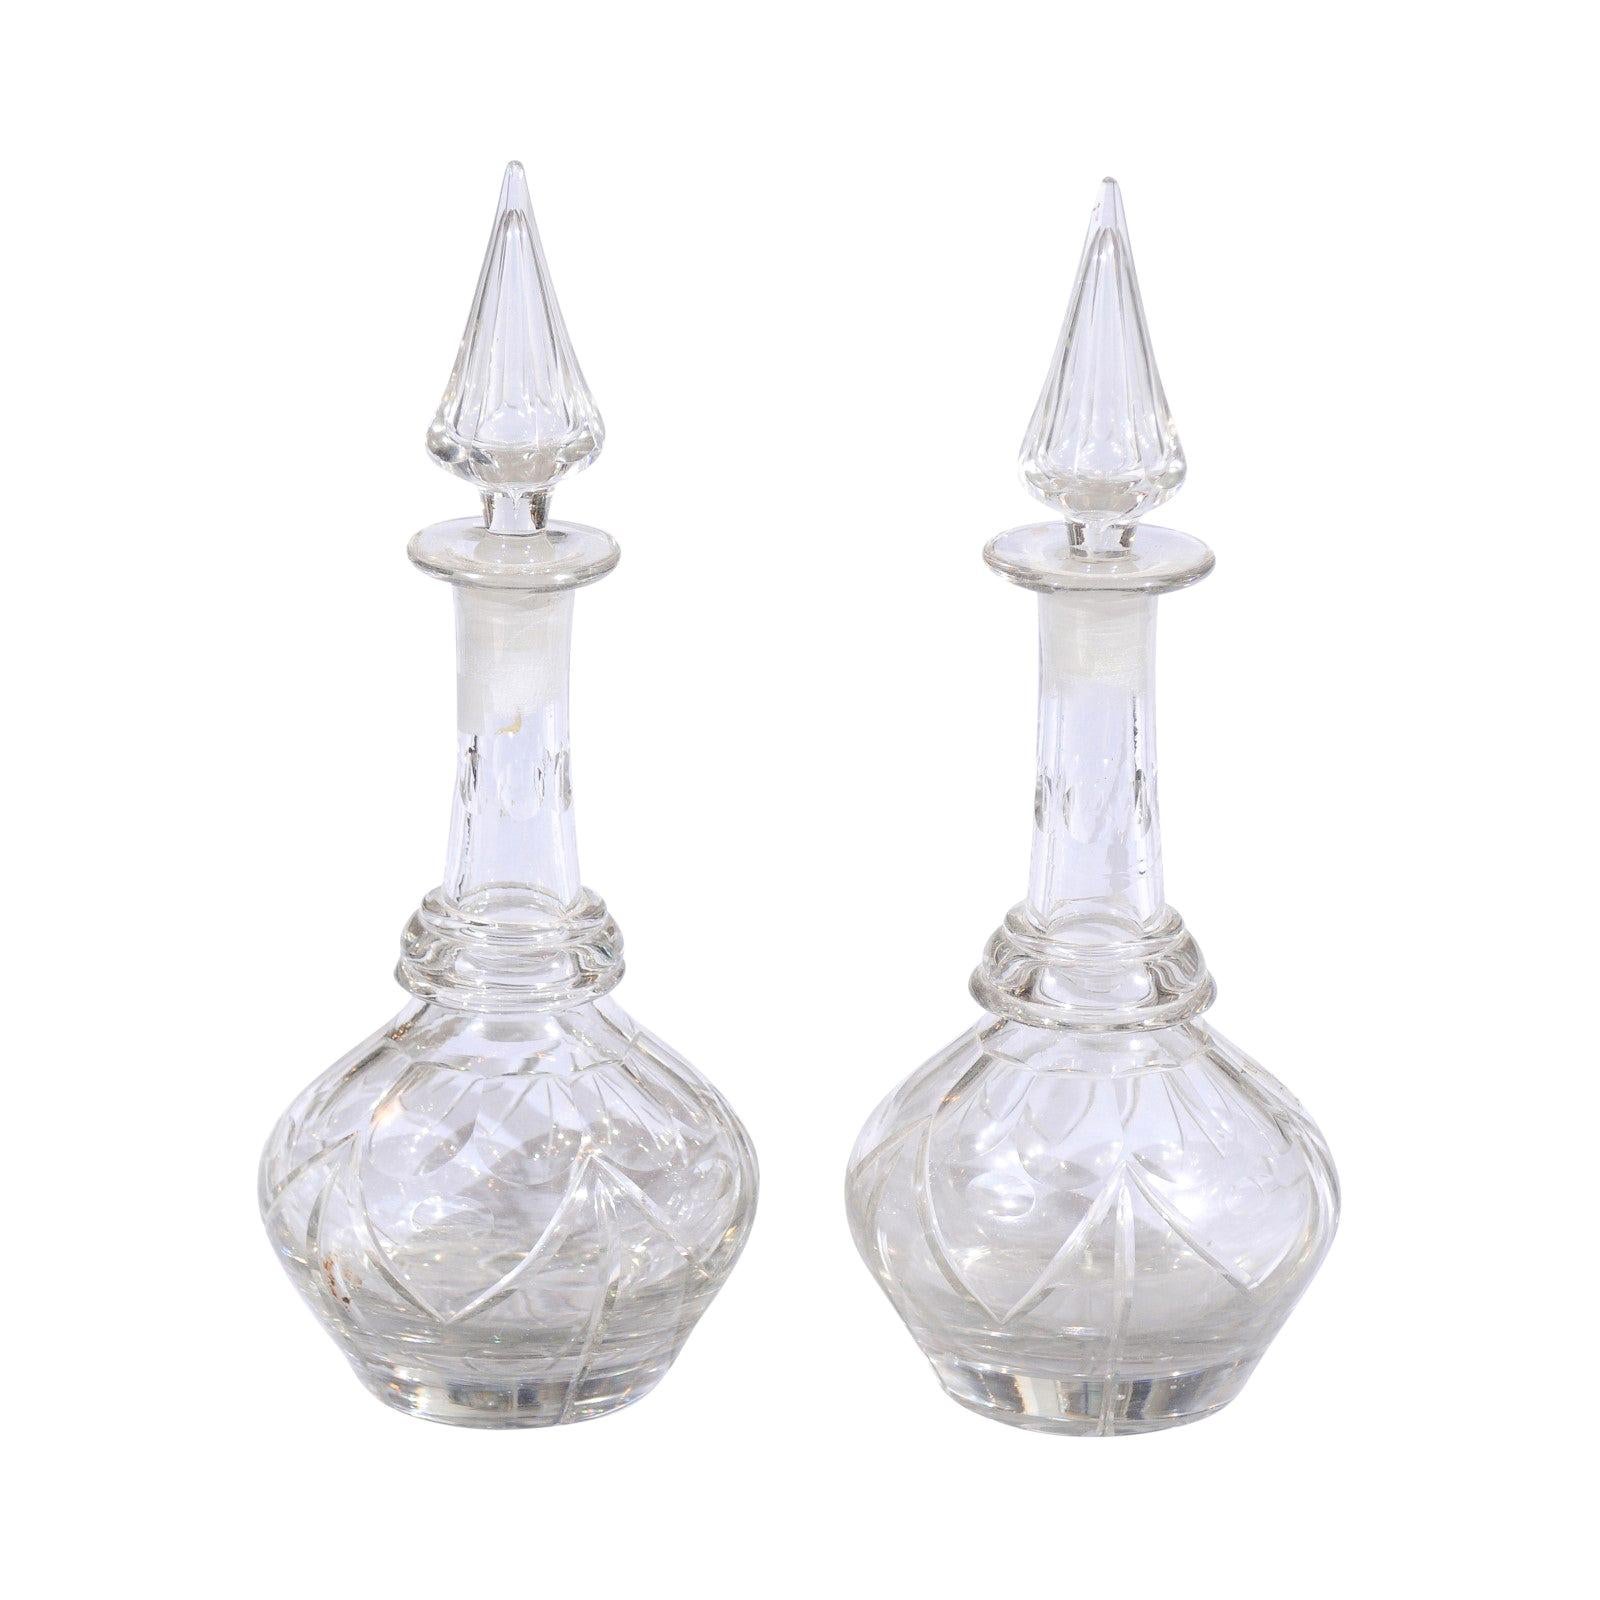 Pair of English Late Victorian Cut Crystal Decanters with Stoppers, circa 1860